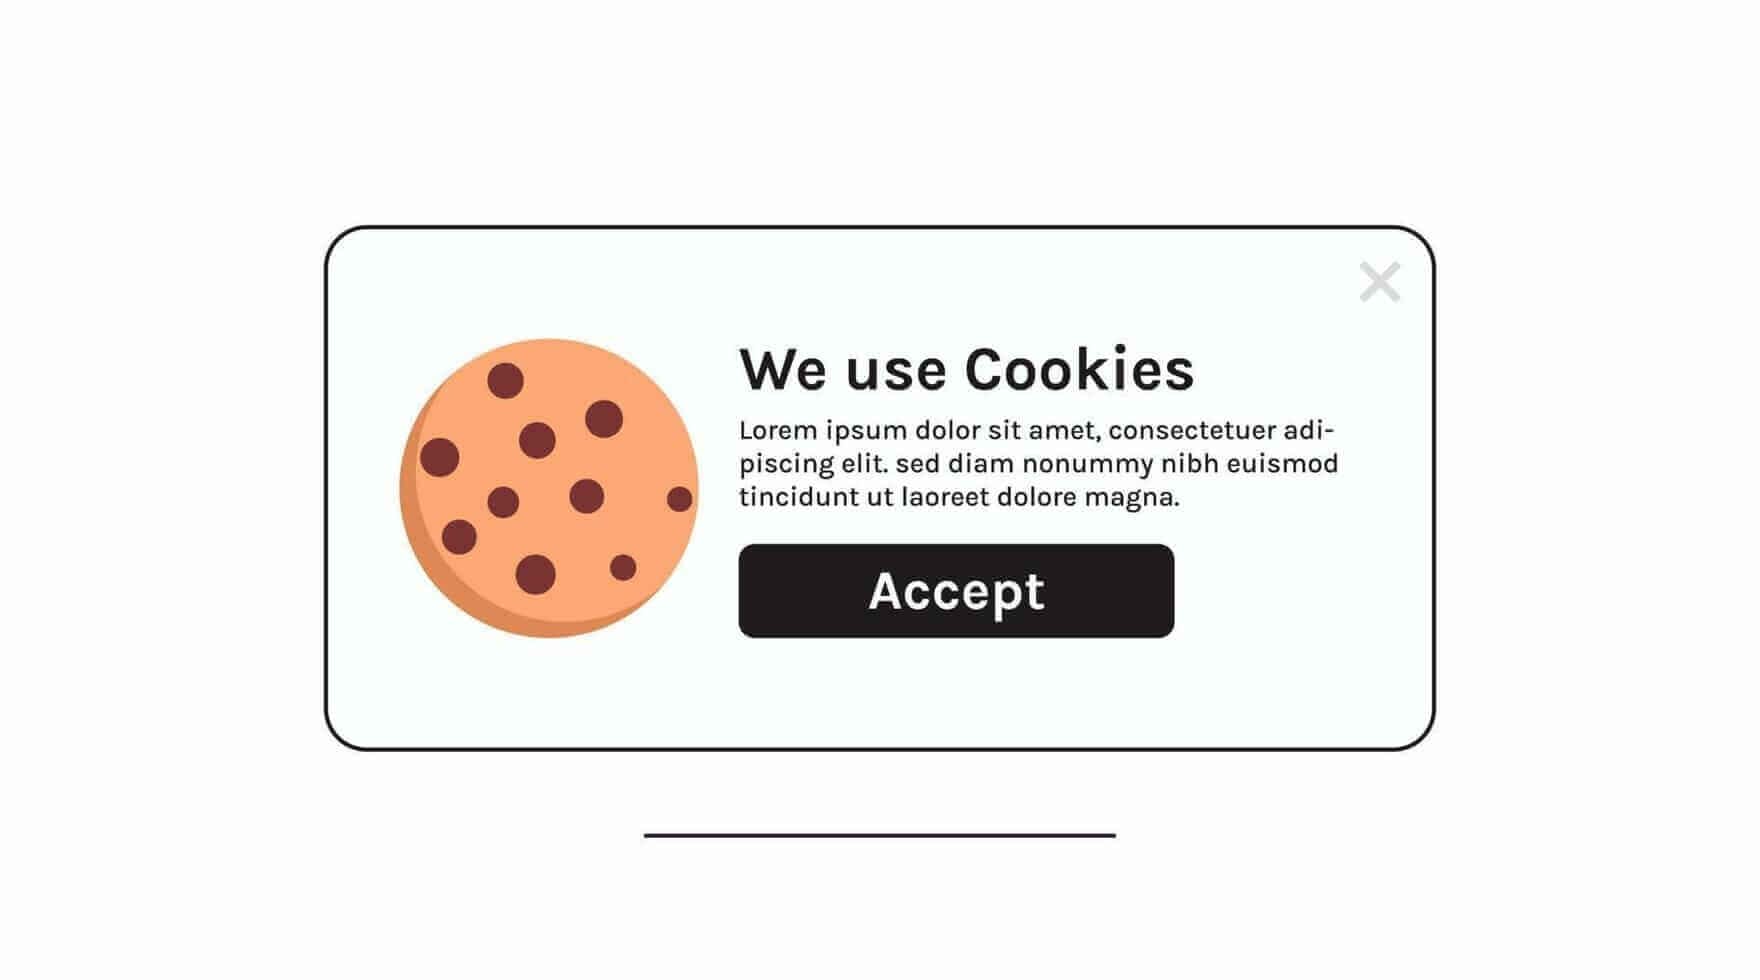 protection of personal data information cookie and internet web page we use cookies policy concept flat illustration vector